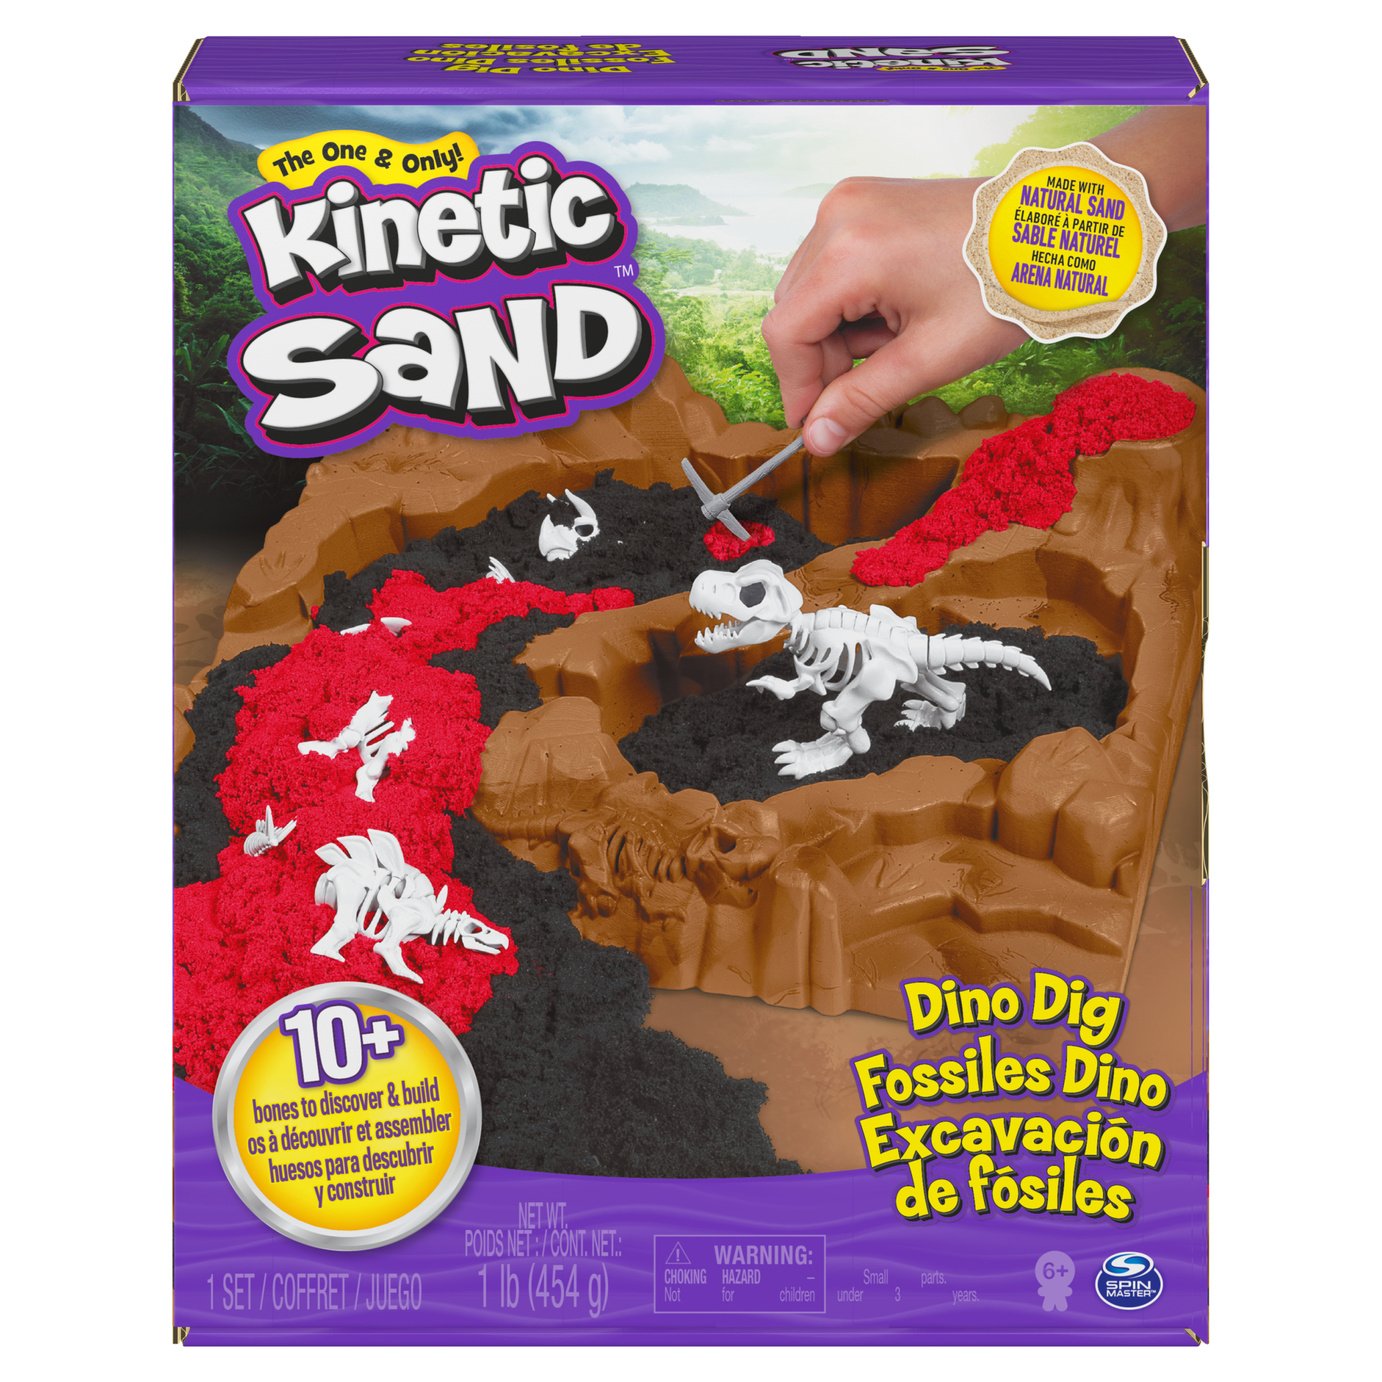 Kinetic Sand Dino Dig Playset Review